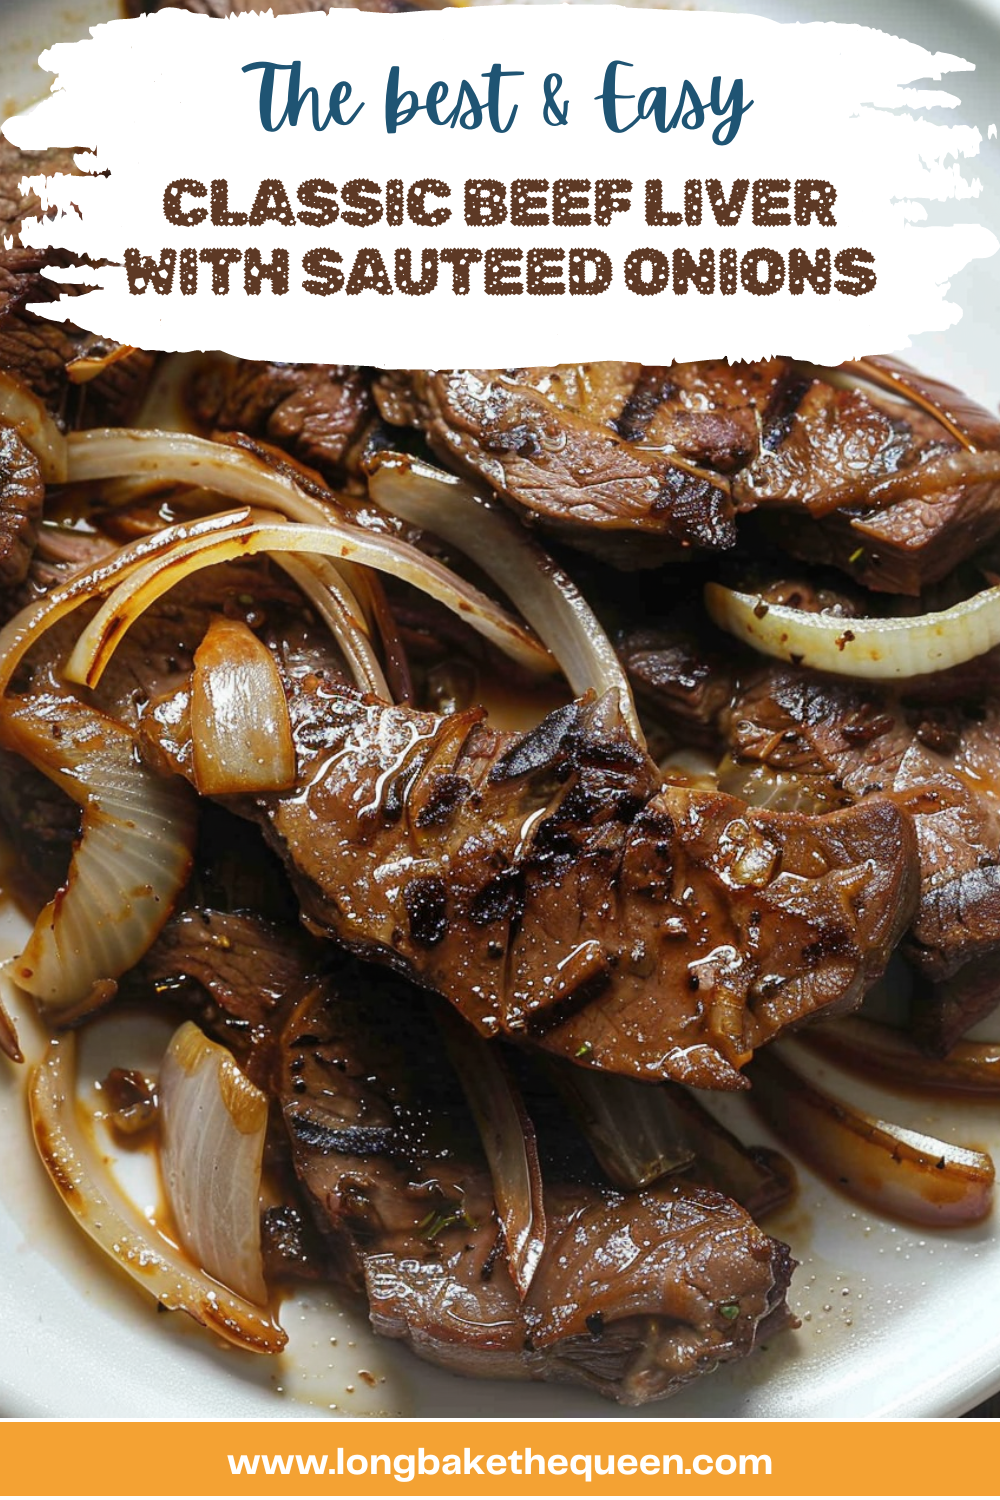 Classic Beef Liver with Sauteed Onions